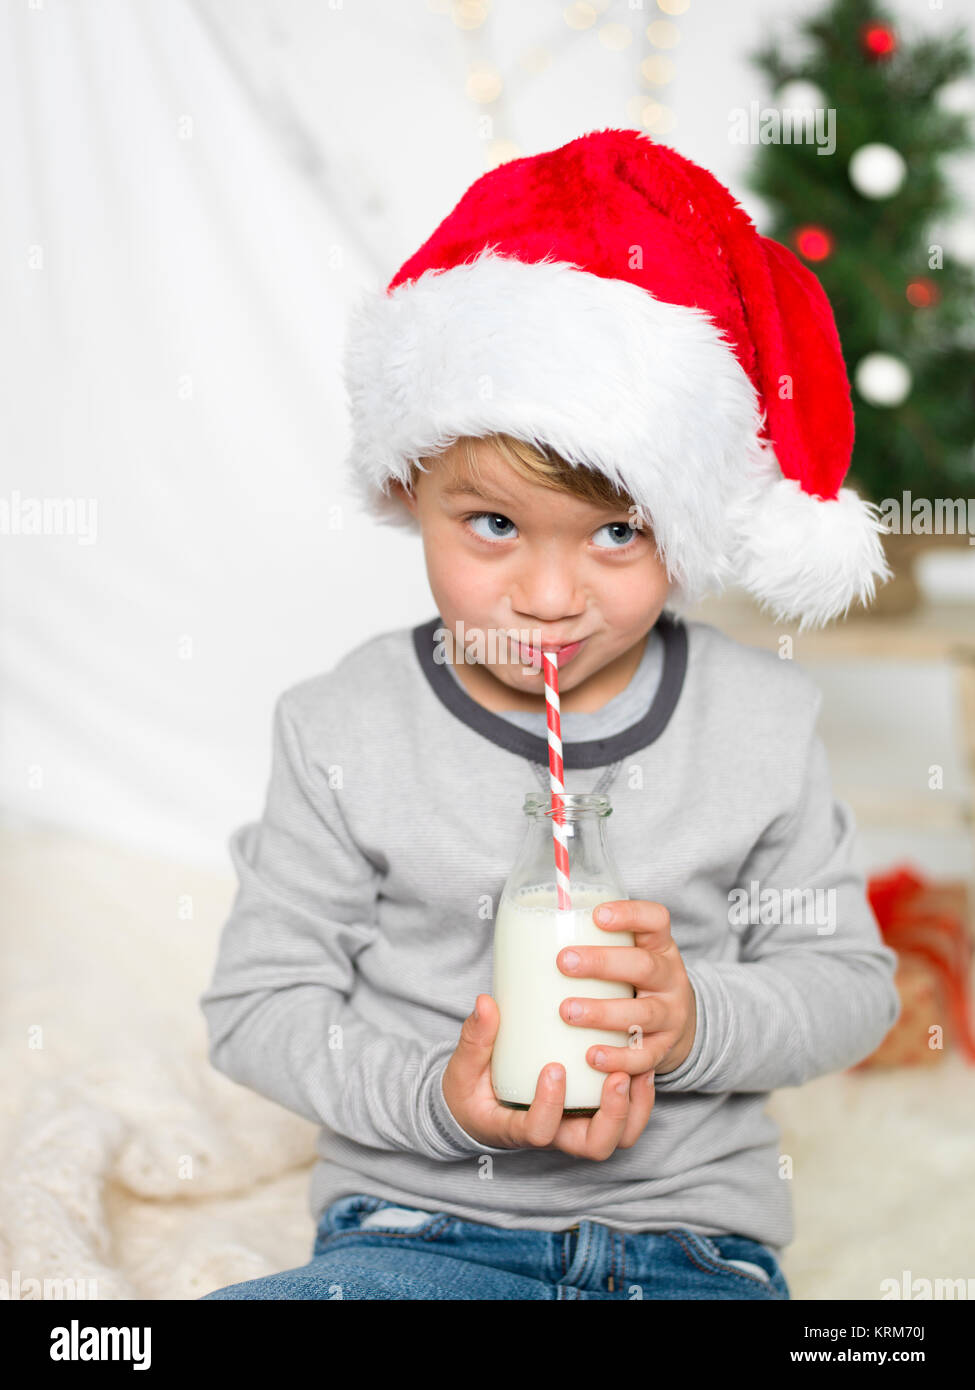 young drinking milk and has weihnachtsmÃ¼tze on Stock Photo